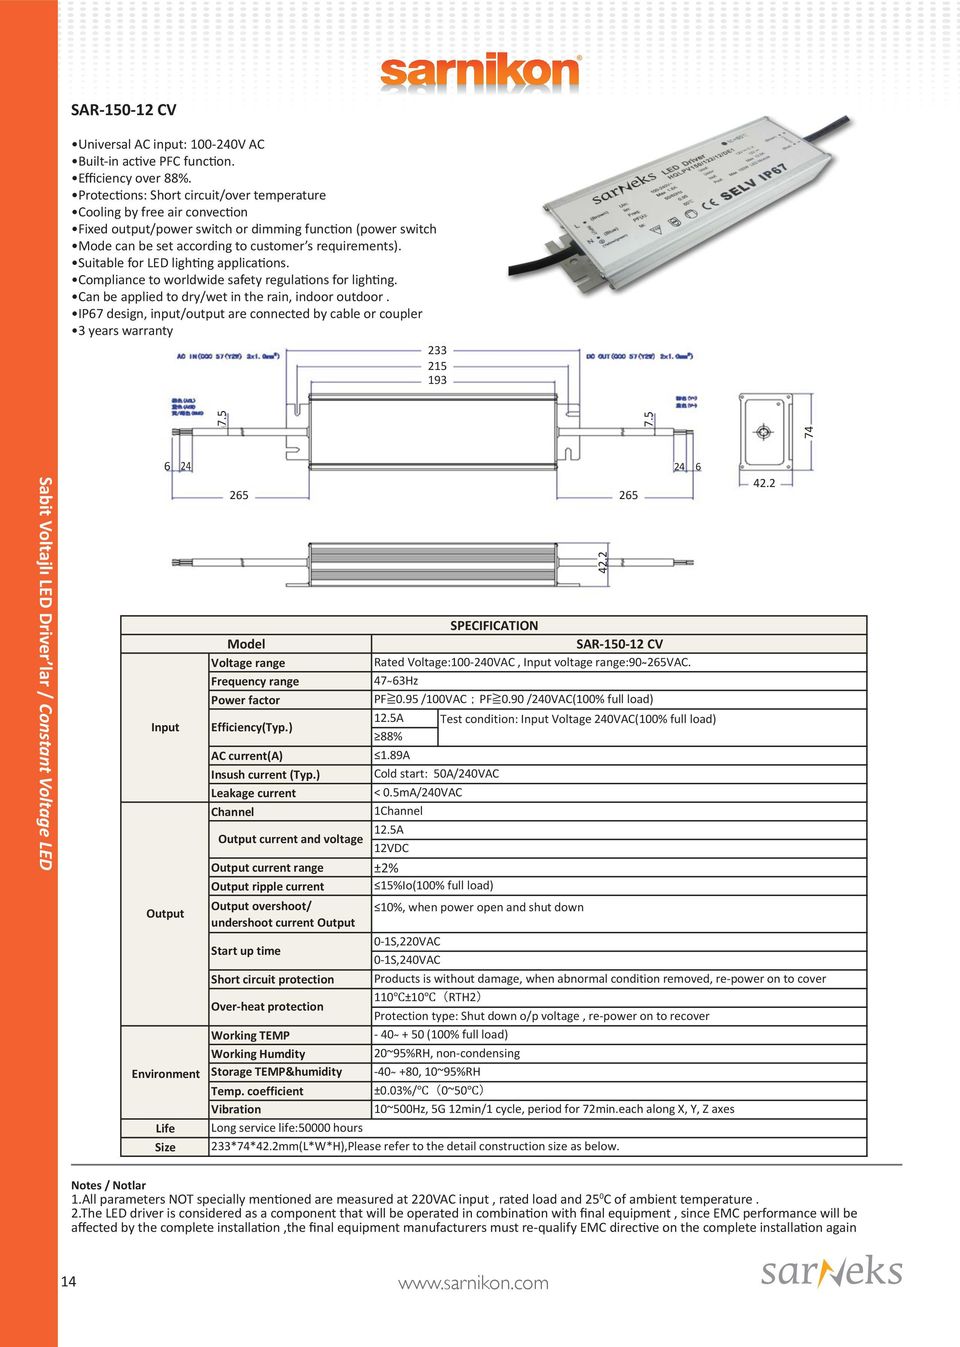 Suitable for LED lighting applications. Compliance to worldwide safety regulations for lighting. Can be applied to dry/wet in the rain, indoor outdoor.